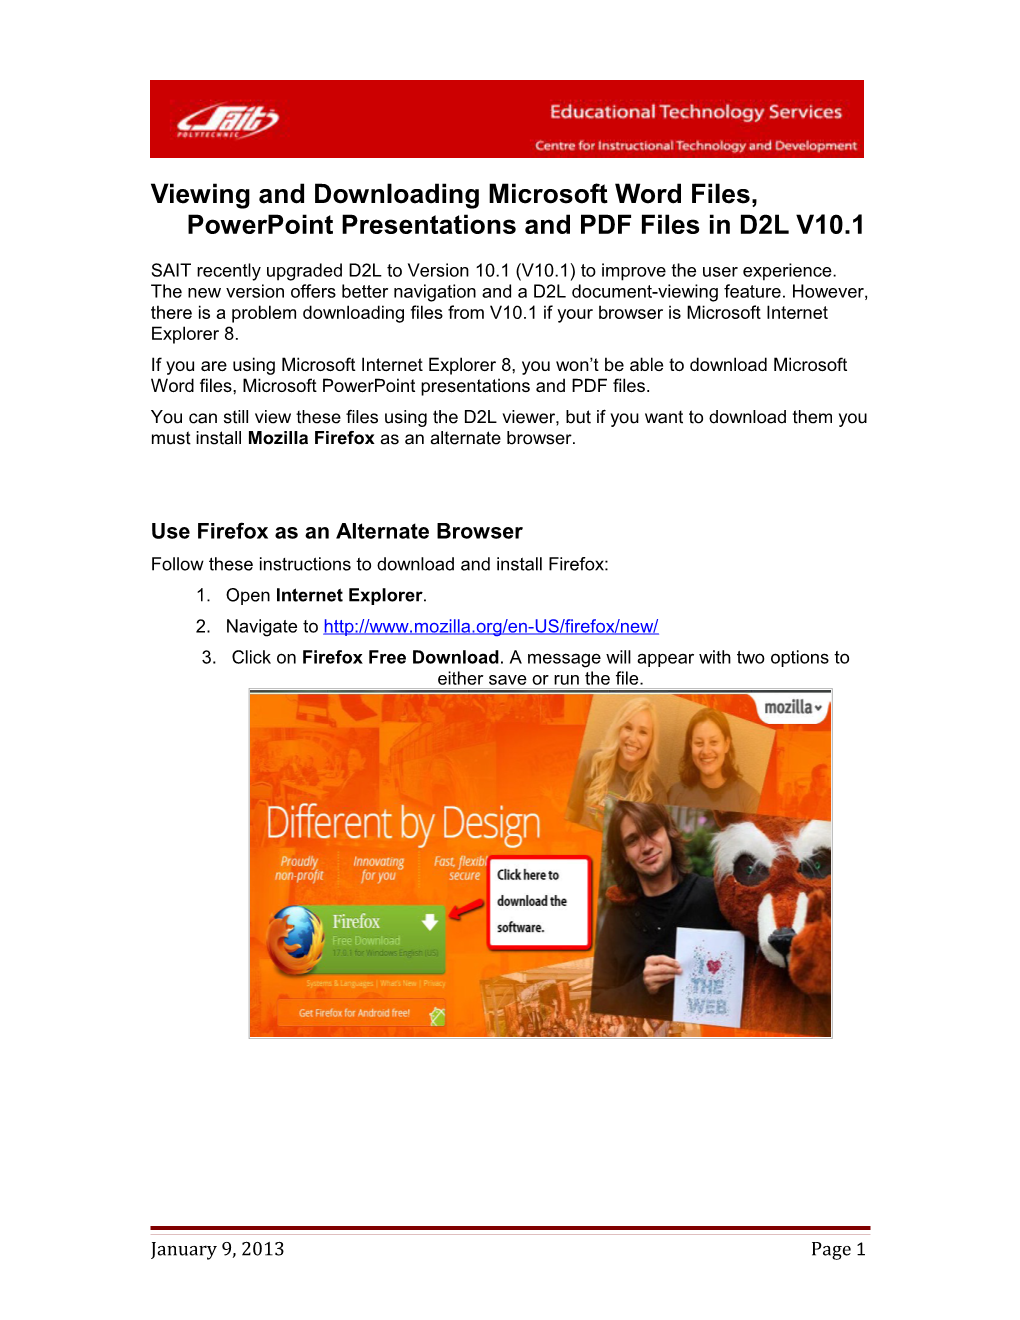 Viewing and Downloading Microsoft Word Files, Powerpoint Presentations and PDF Files In